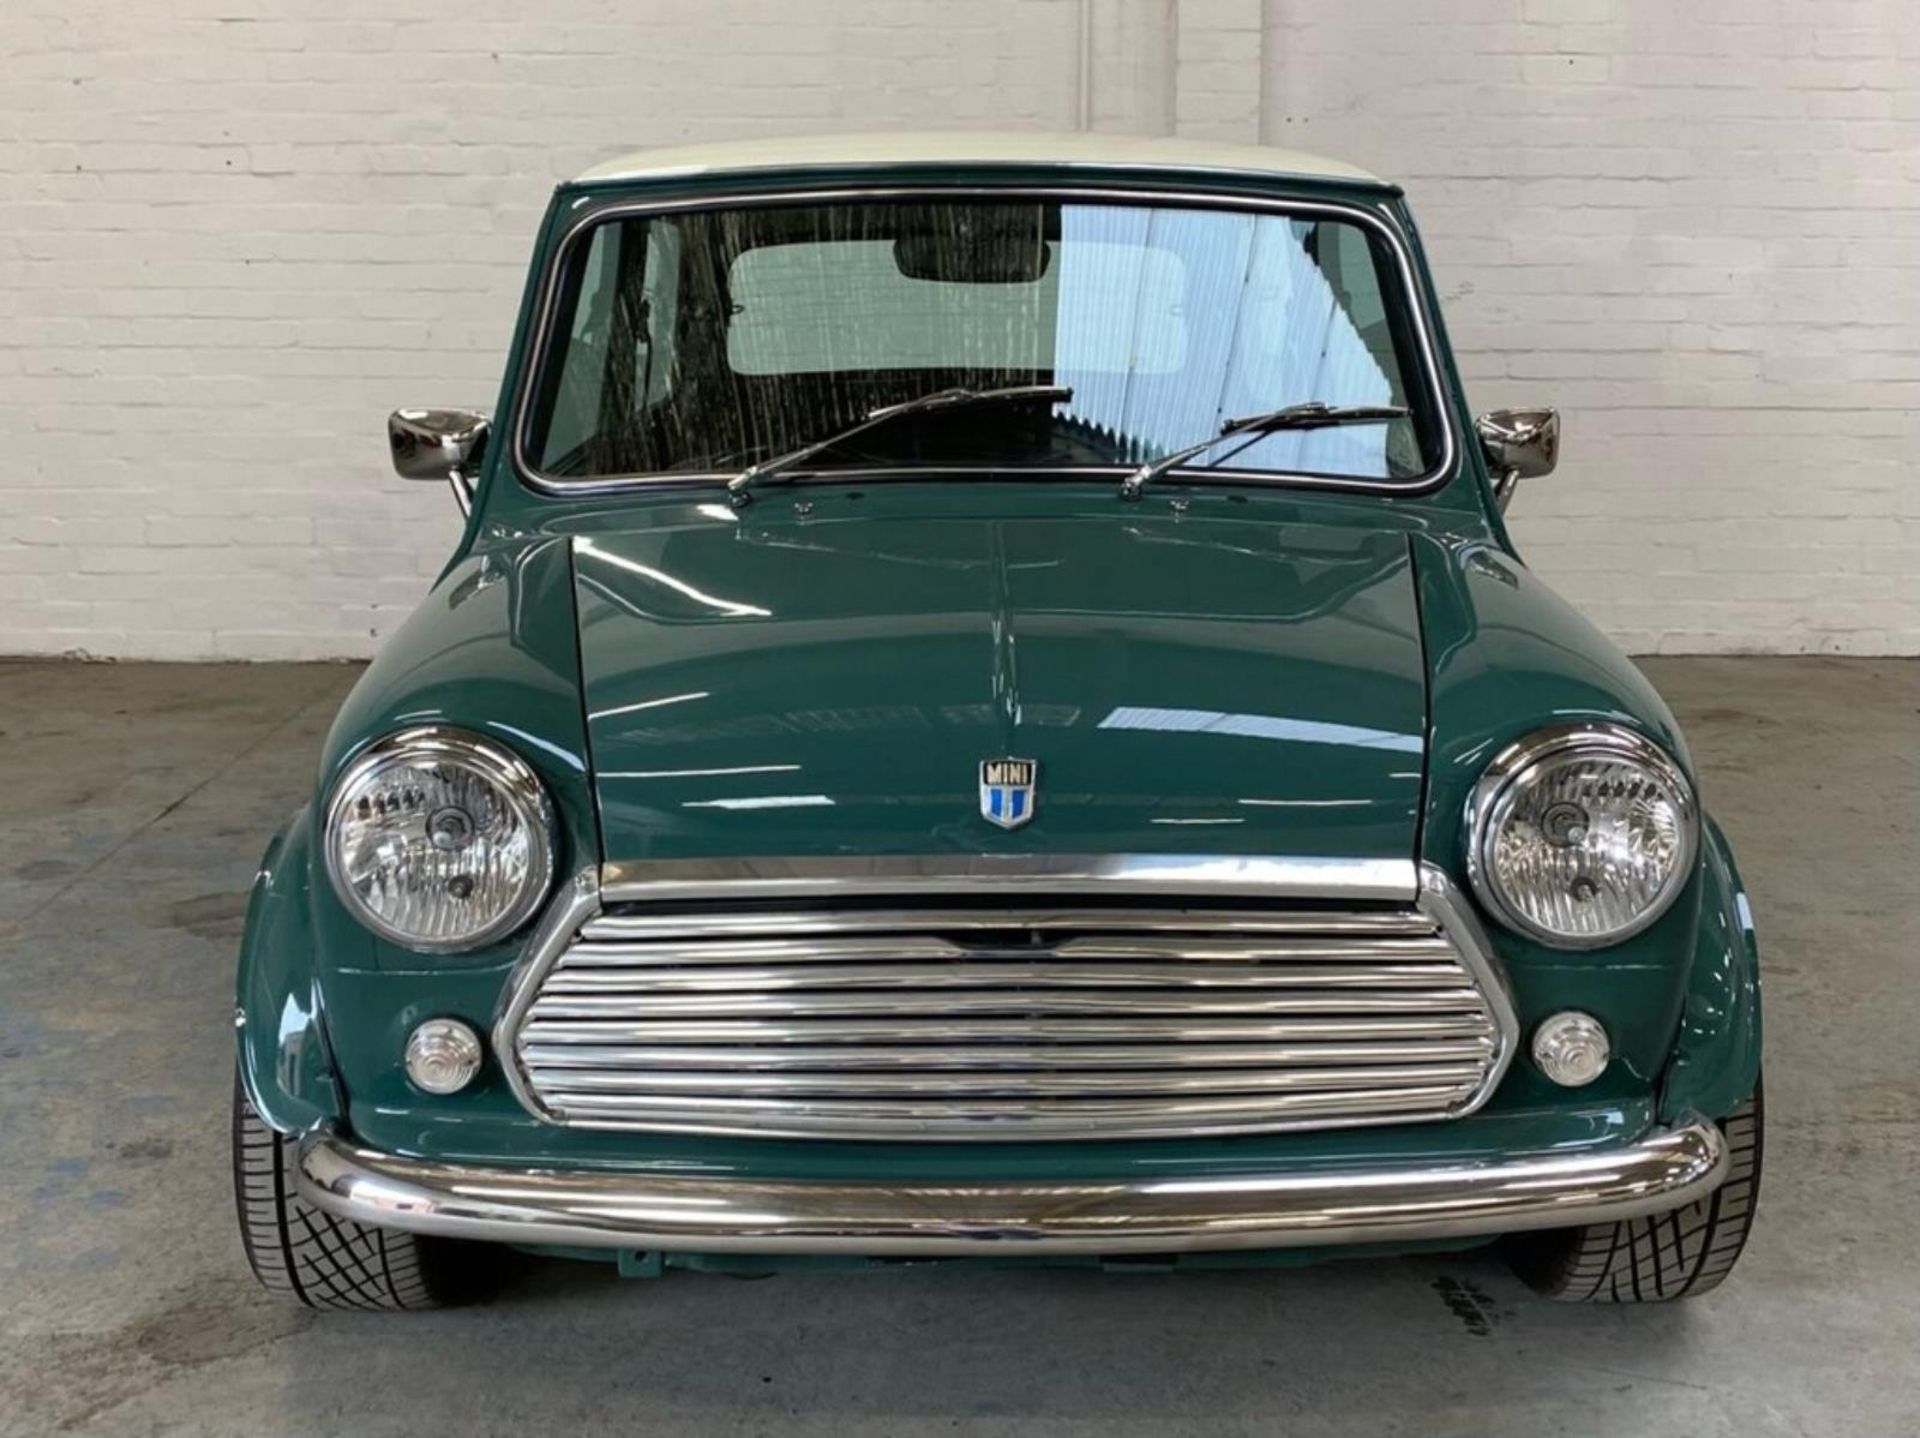 1971 Mini Cooper S Recreation Registration number KFB 656J Green with a white roof Black interior - Image 8 of 18